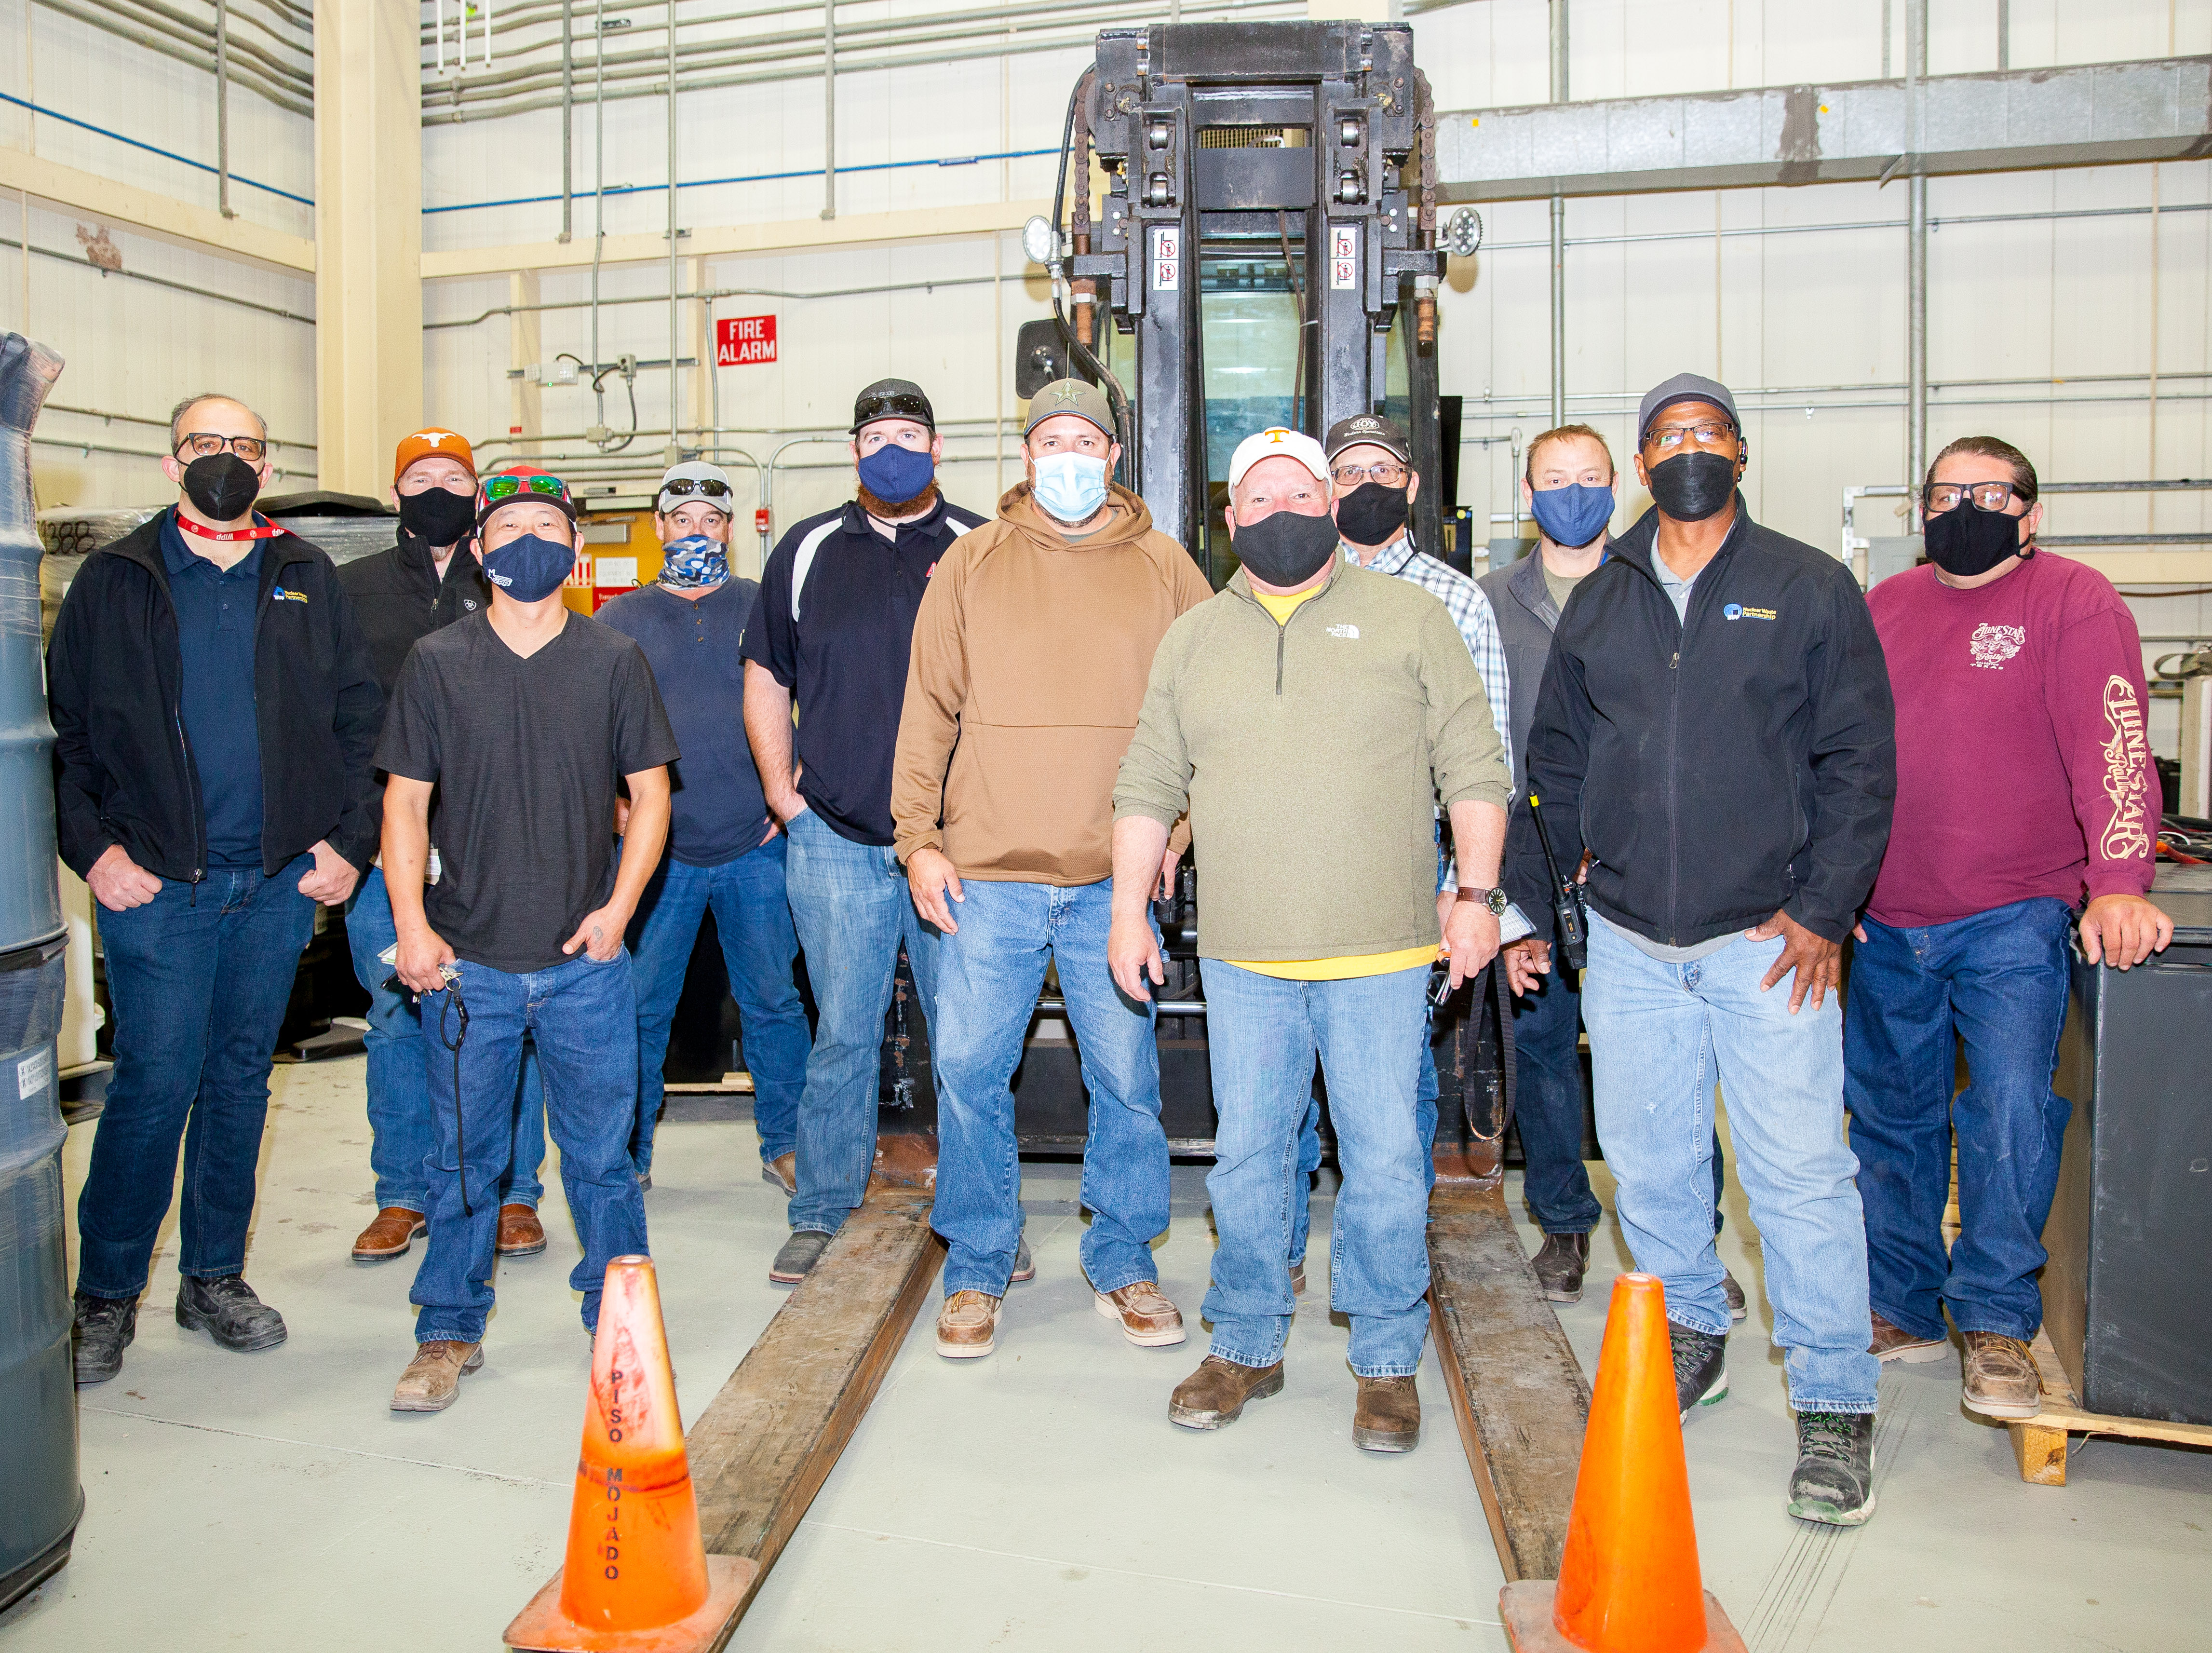 Members of the Engineering and Maintenance crew that solved the issue of charging the forklift batteries